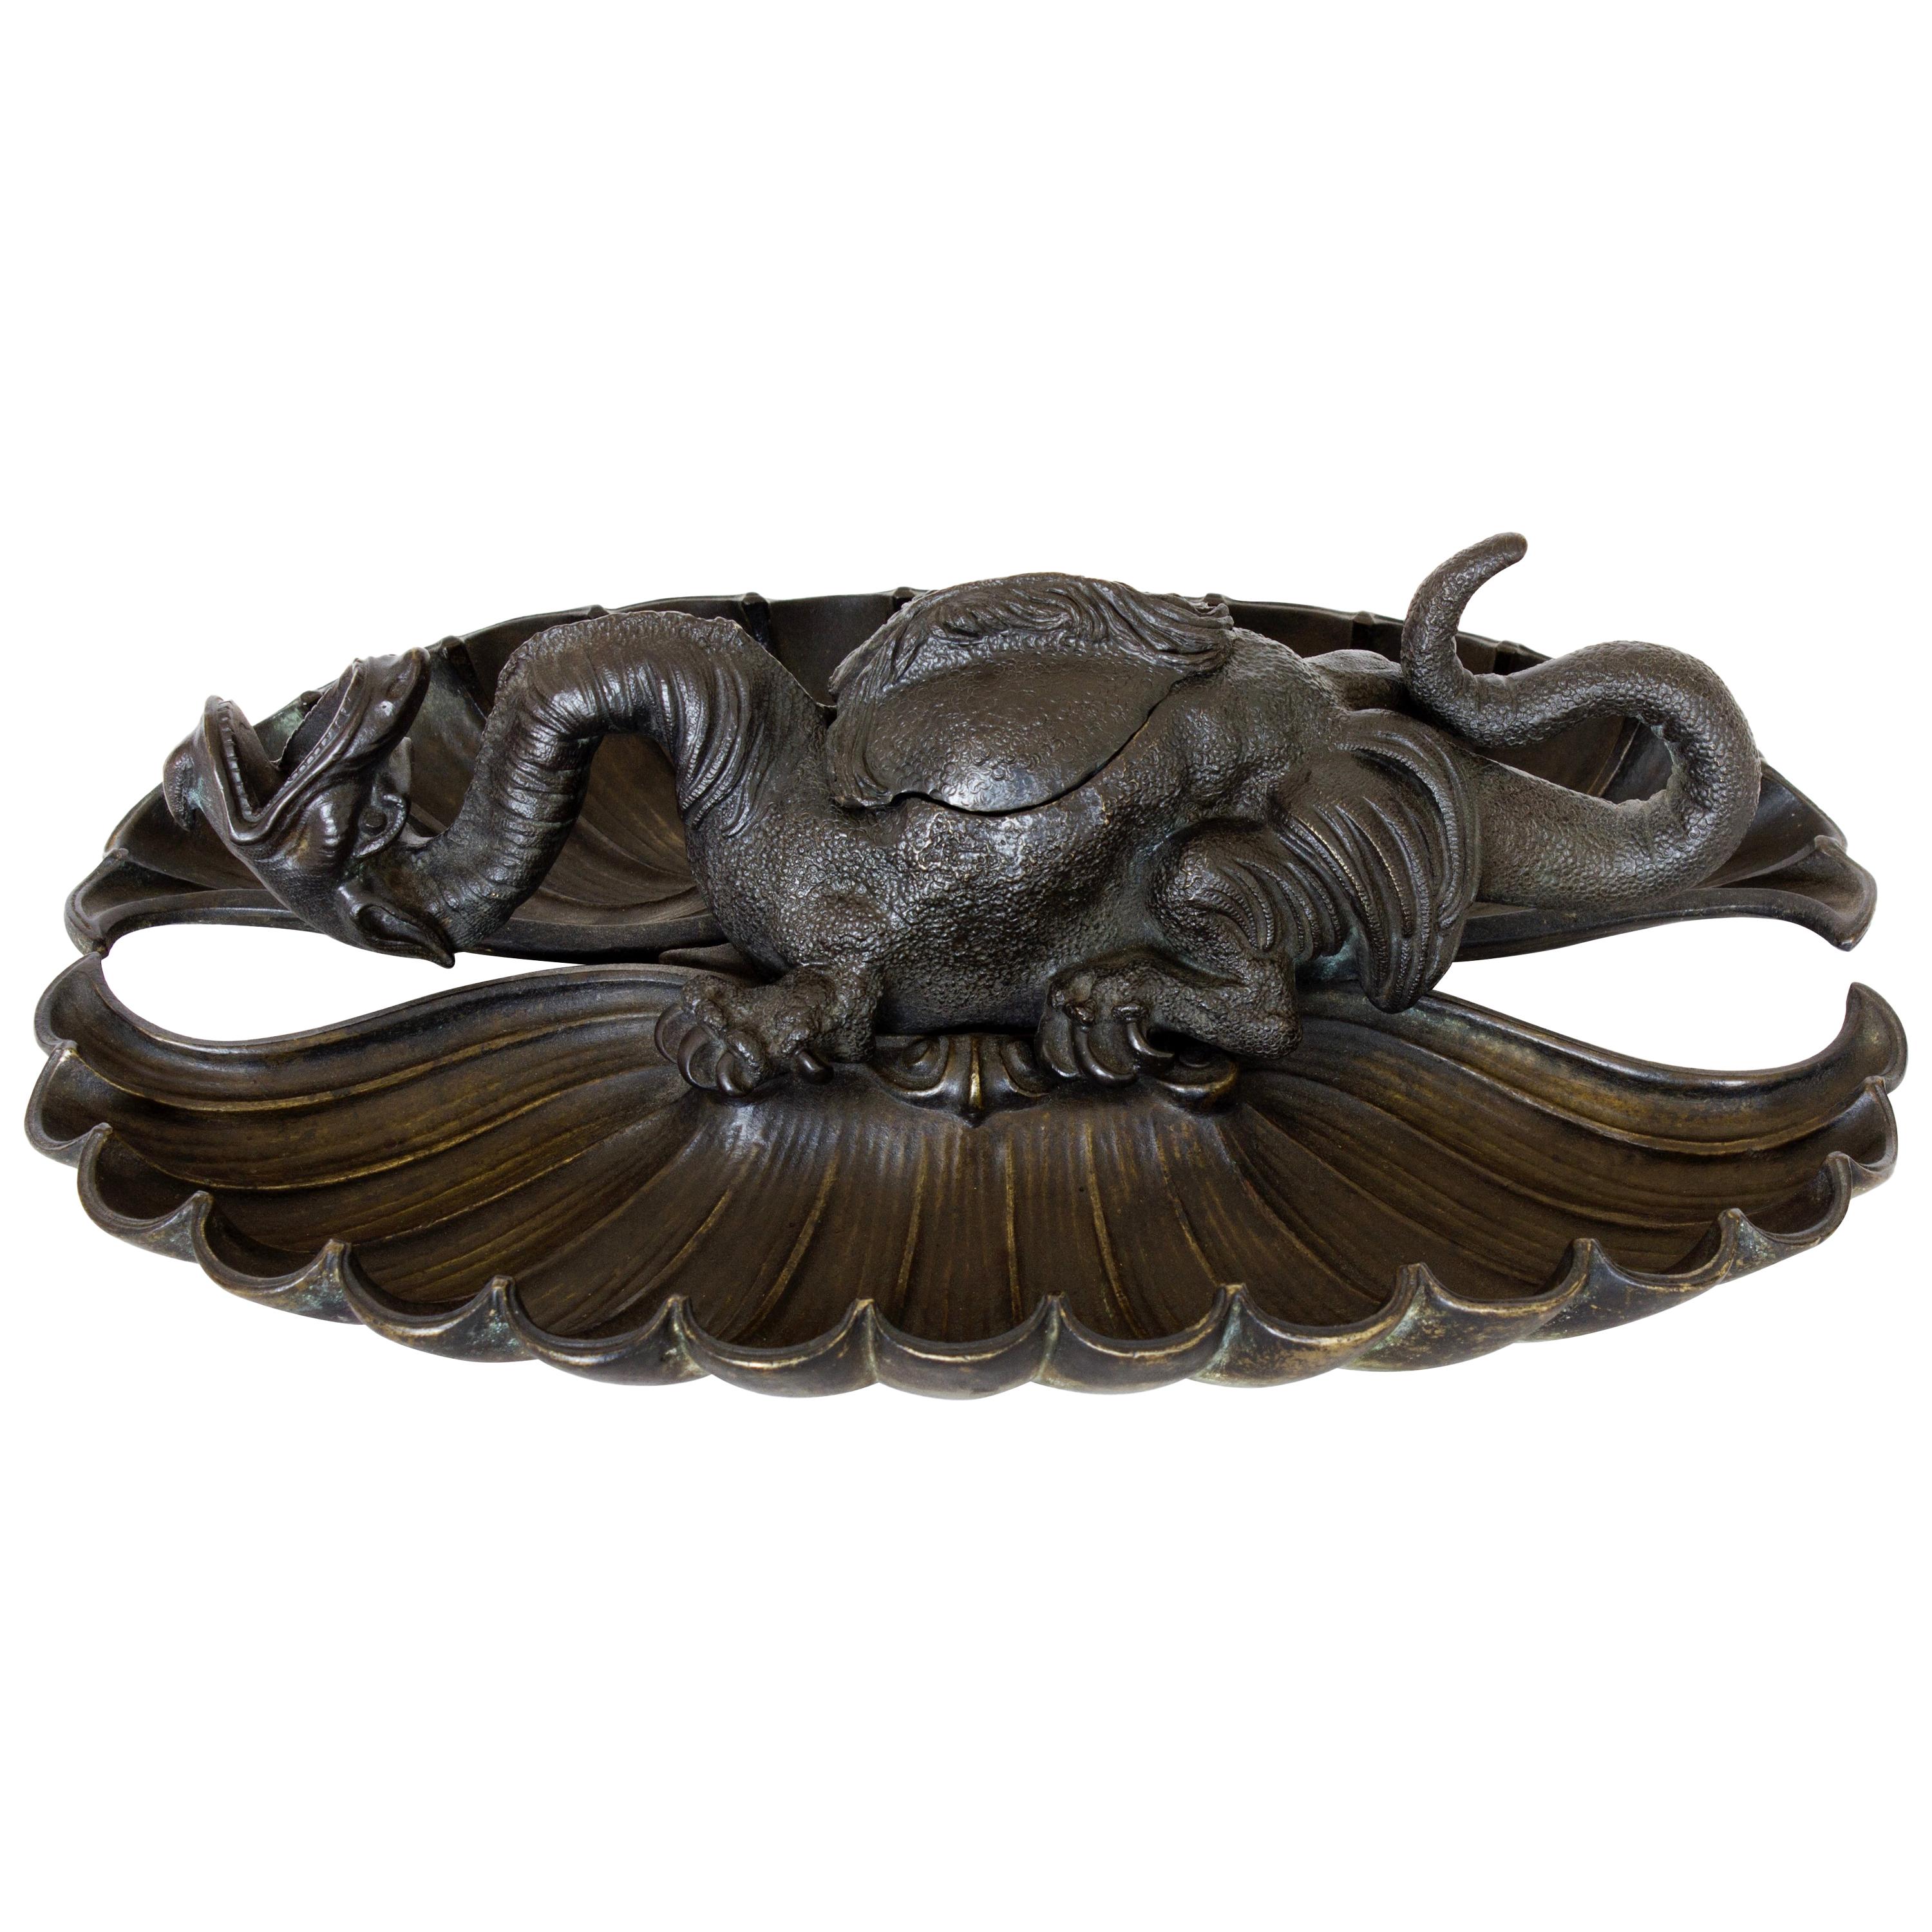 Bronze dragon standing on a stylized leaf.
Magnificent piece which shines with its originality and the chiseling work developed all-over its decors.
Dimensions: H 10 cm x W 31.5 x D 22.5 cm.